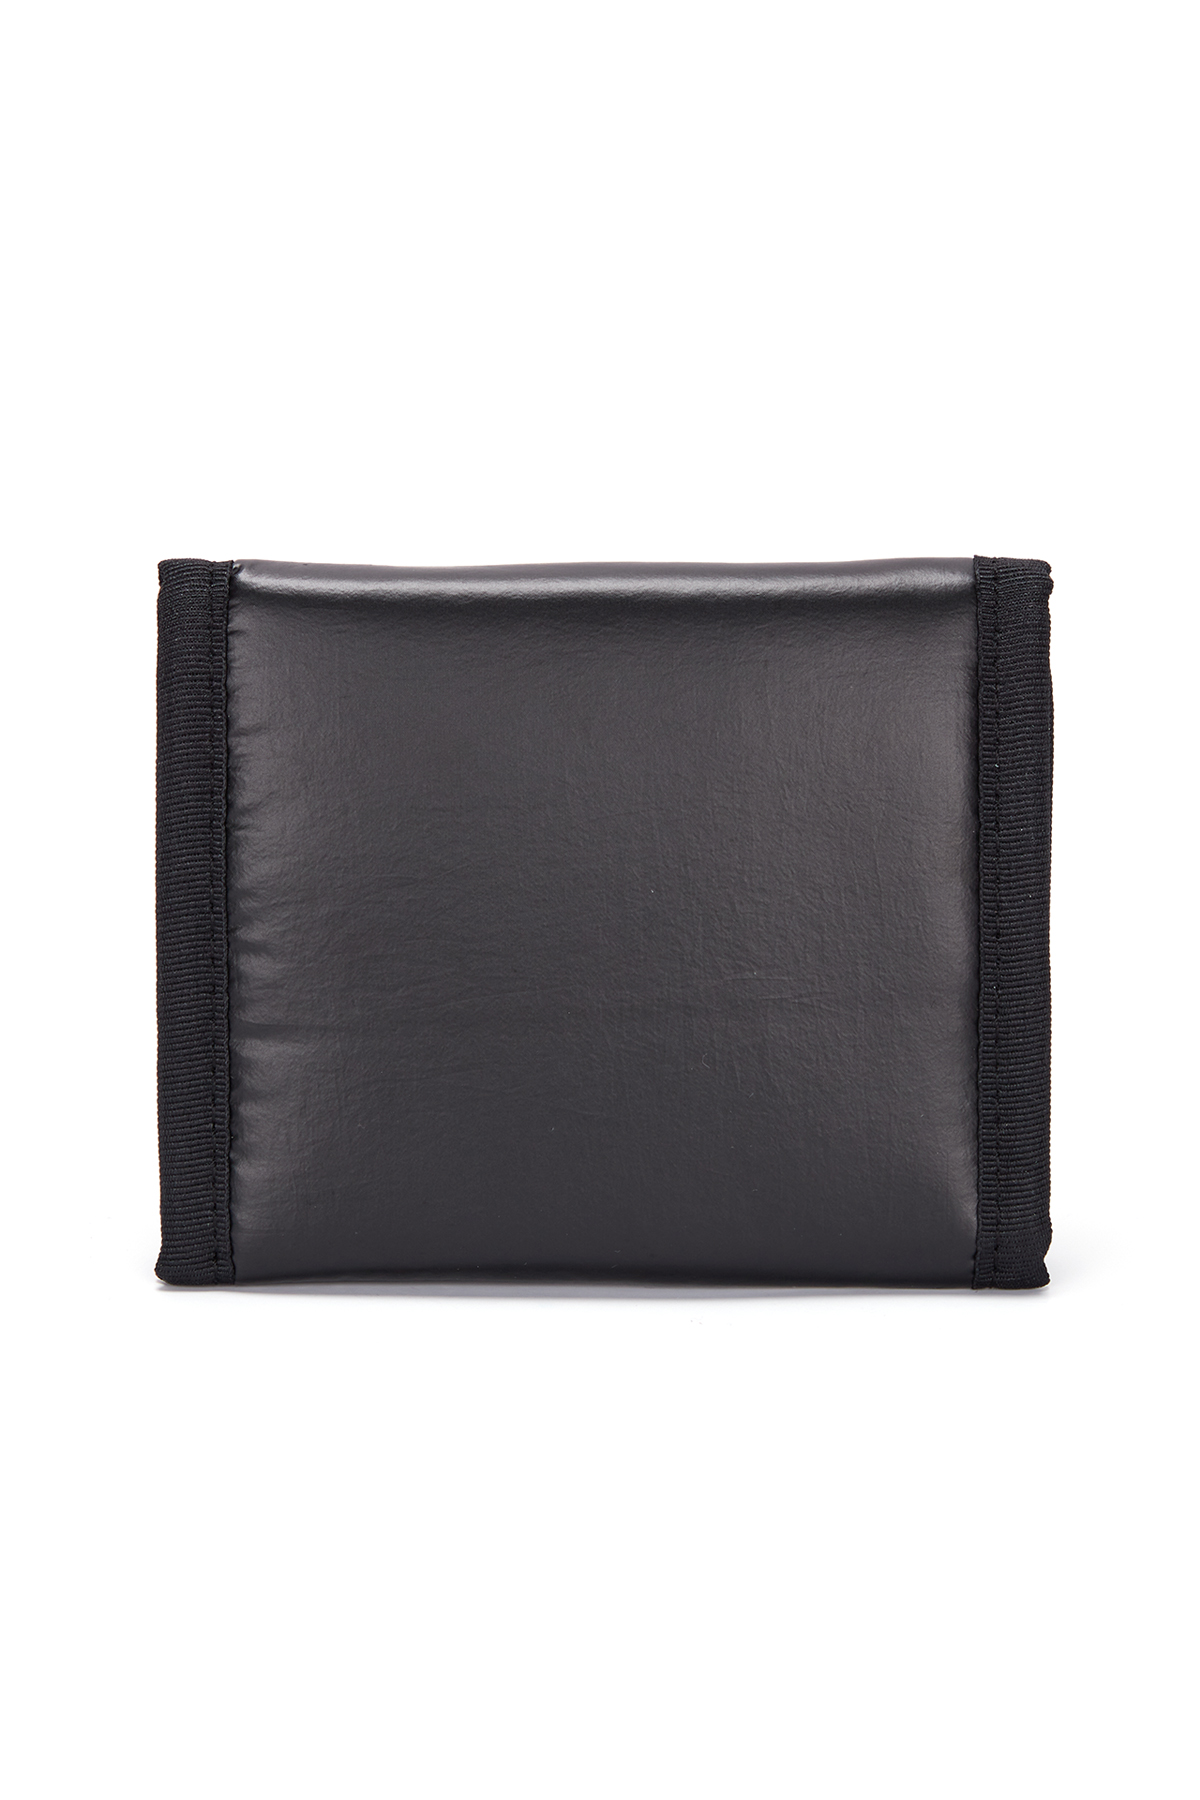 GLOSSY CAMP WALLET IN BLACK